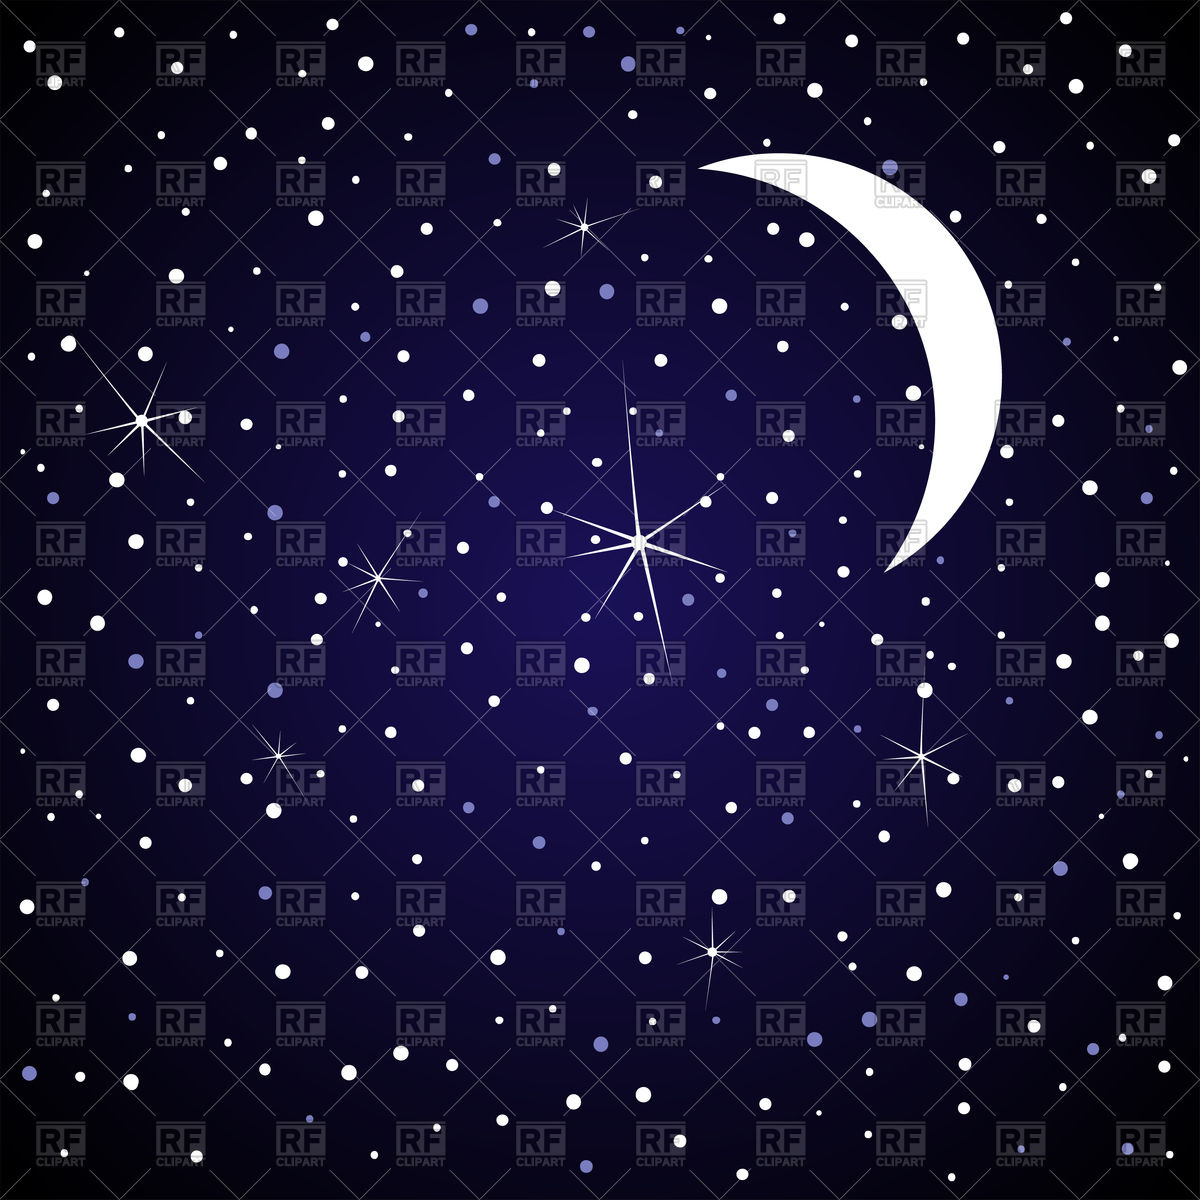 Clip Arts Related To : night sky black and white clip art. 